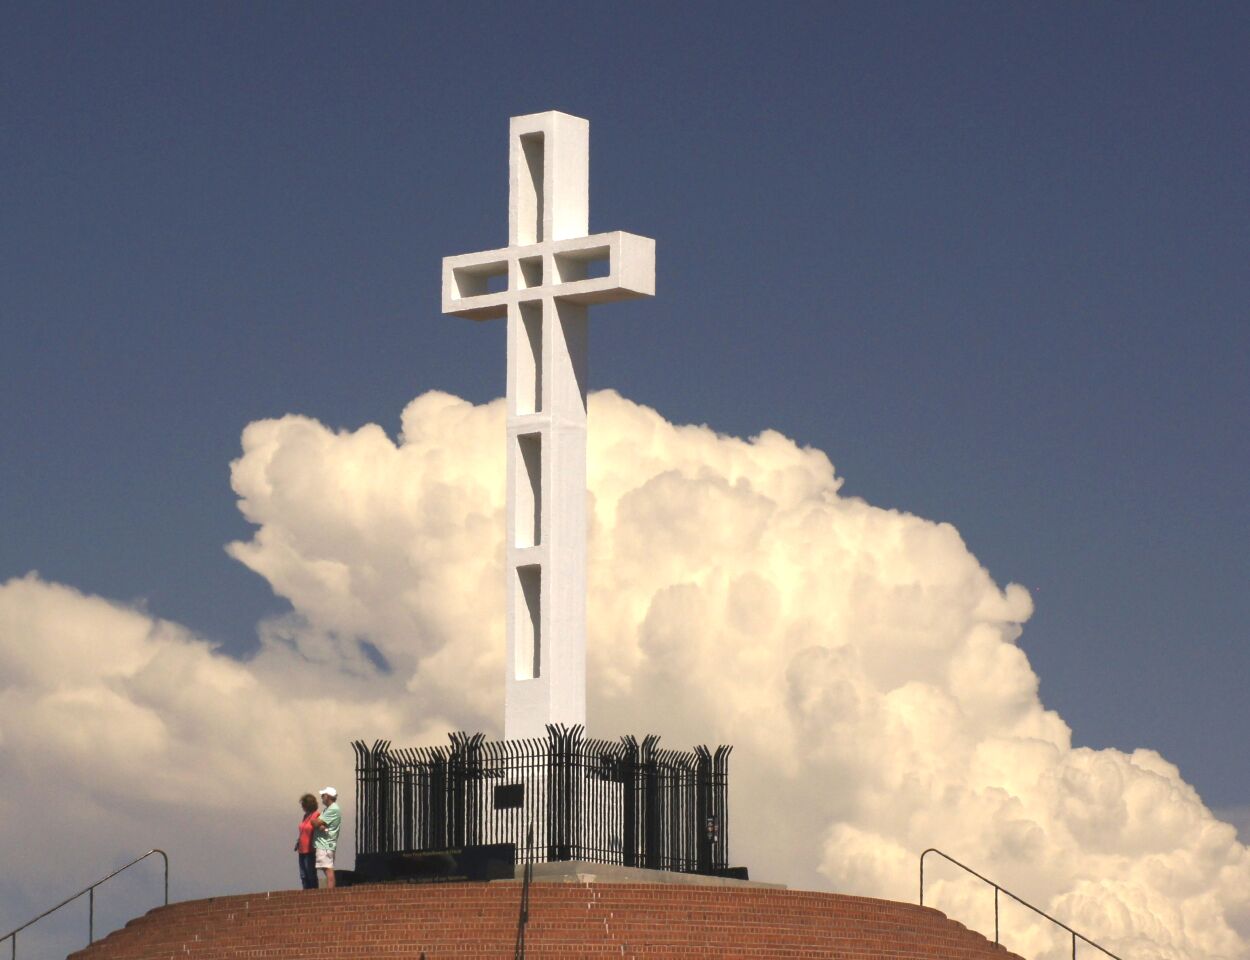 Billowing clouds provide the backdrop for the Mount Soledad National Veterans Memorial cross.